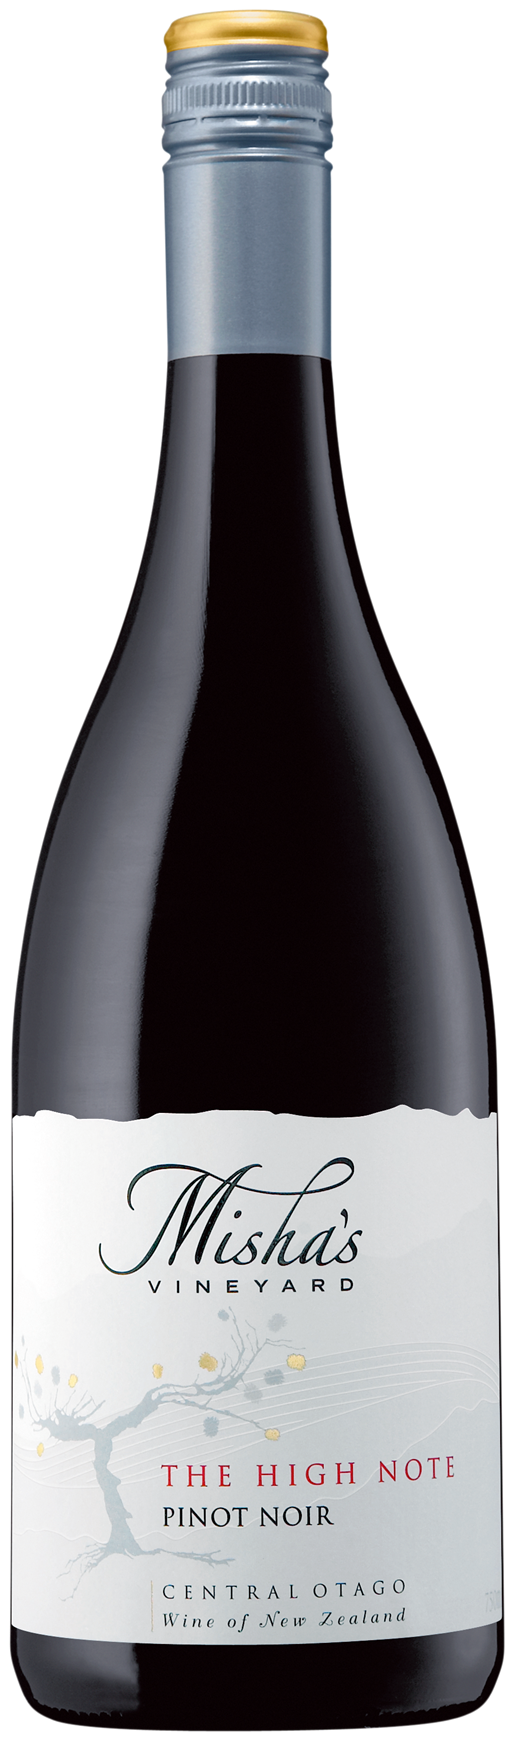 An image of a bottle of a Misha's Vineyard 'The High Note' Central Otago Pinot Noir from New Zealand